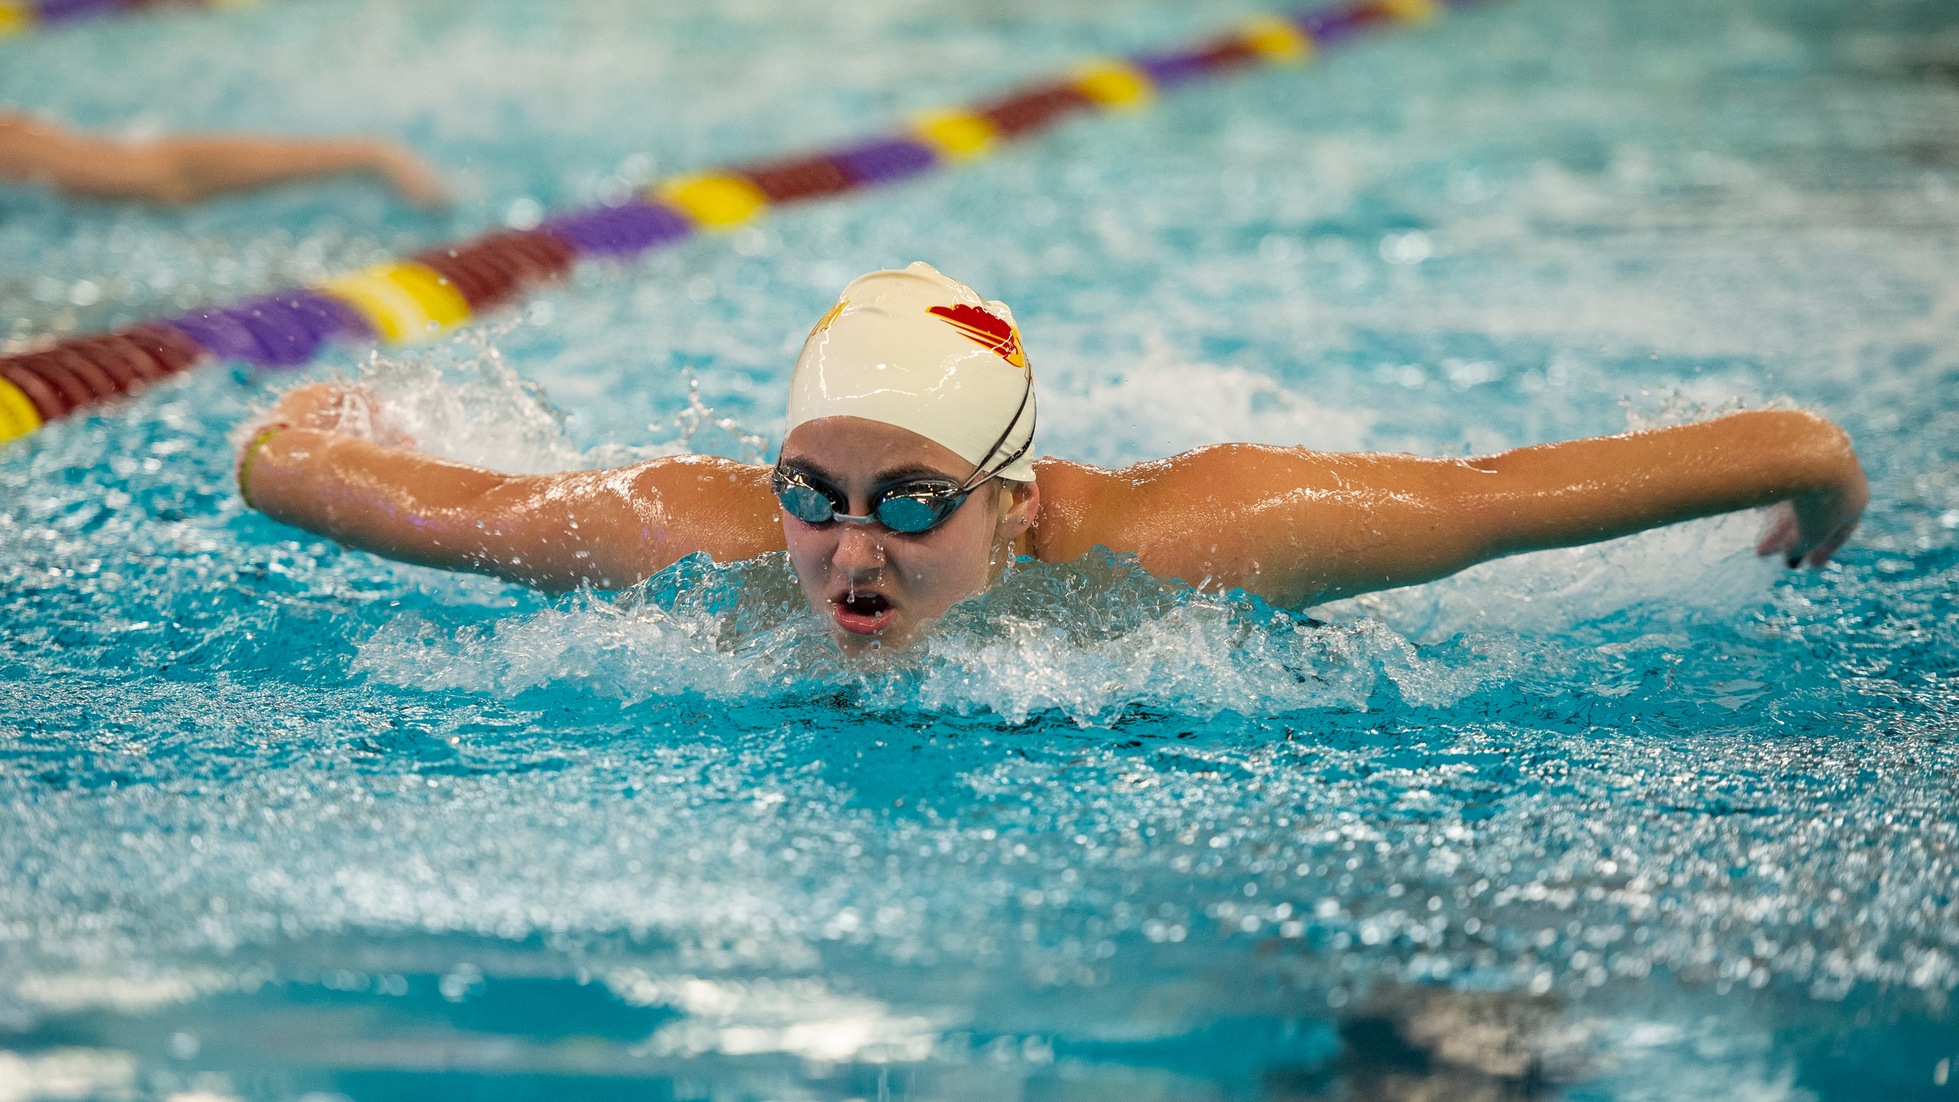 Storm swimmers compete against Coe in home debut